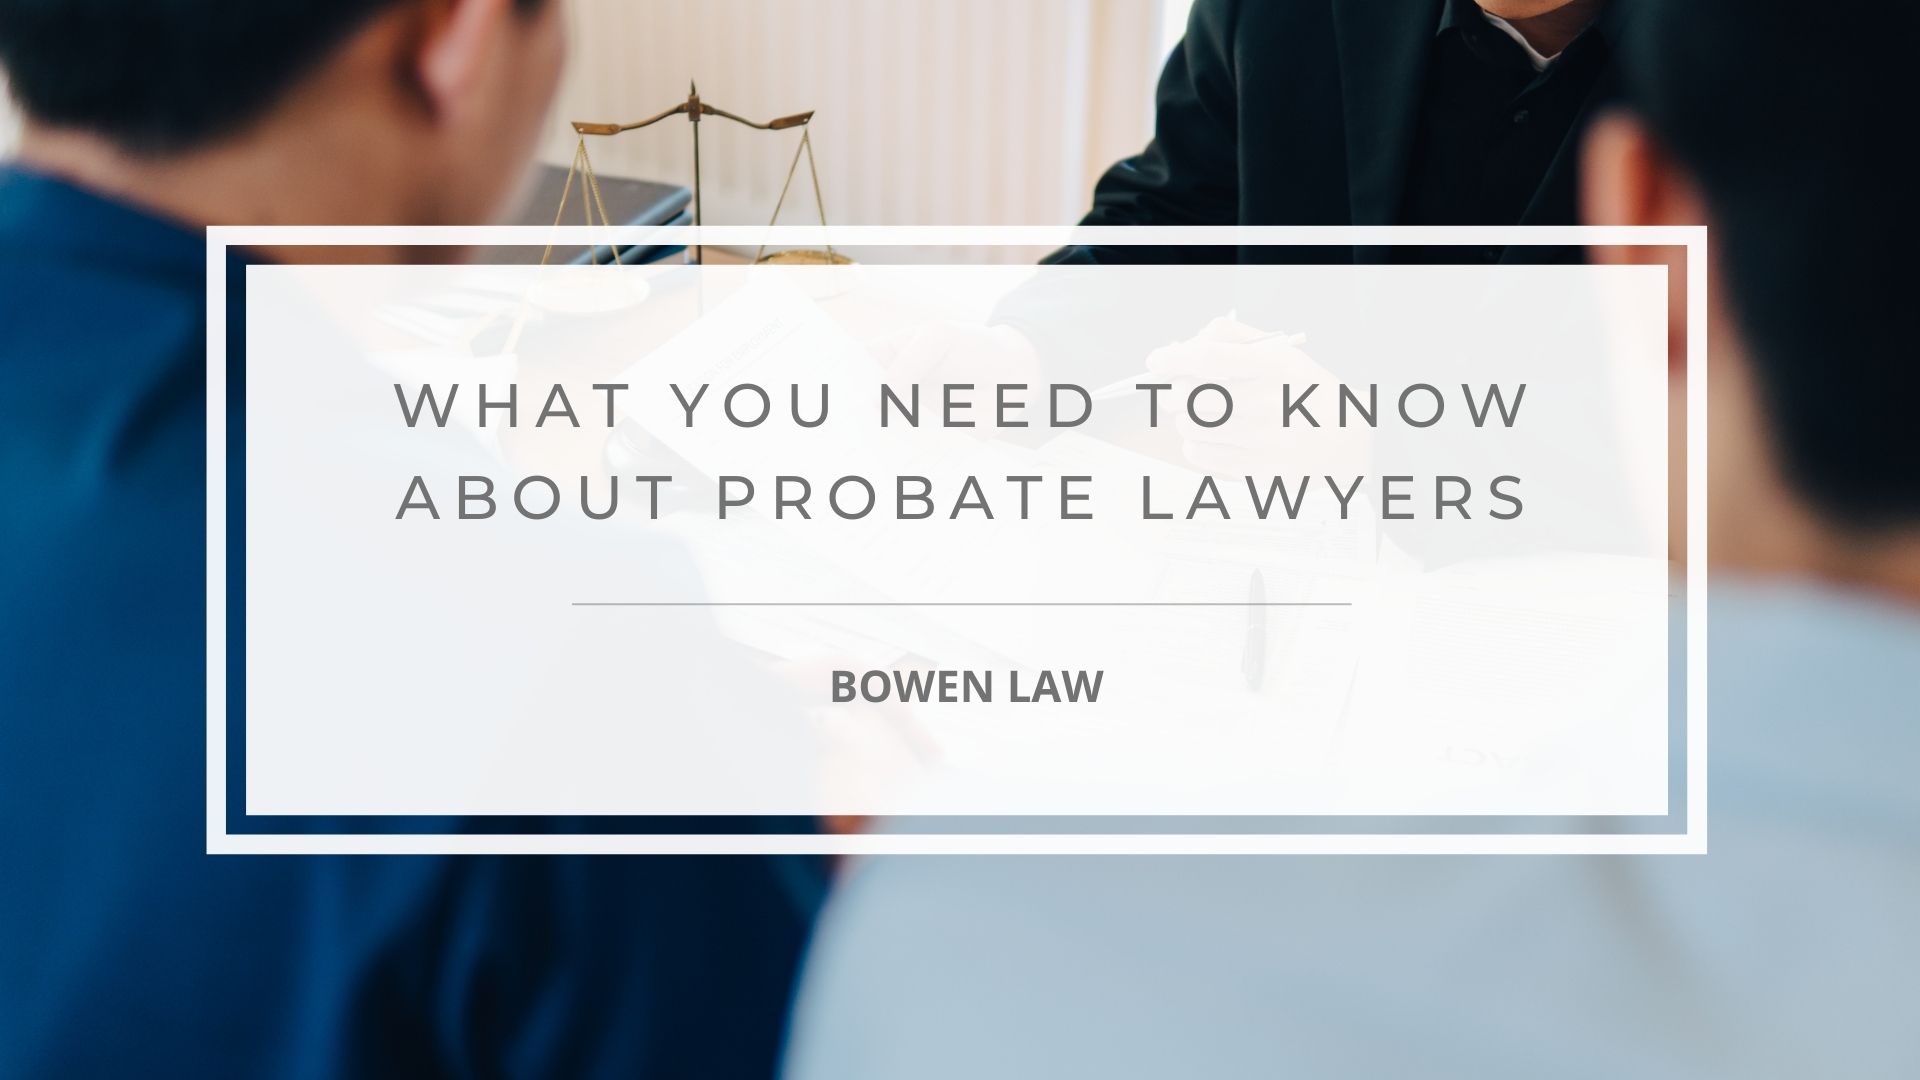 Featured image of what you need to know about probate lawyers